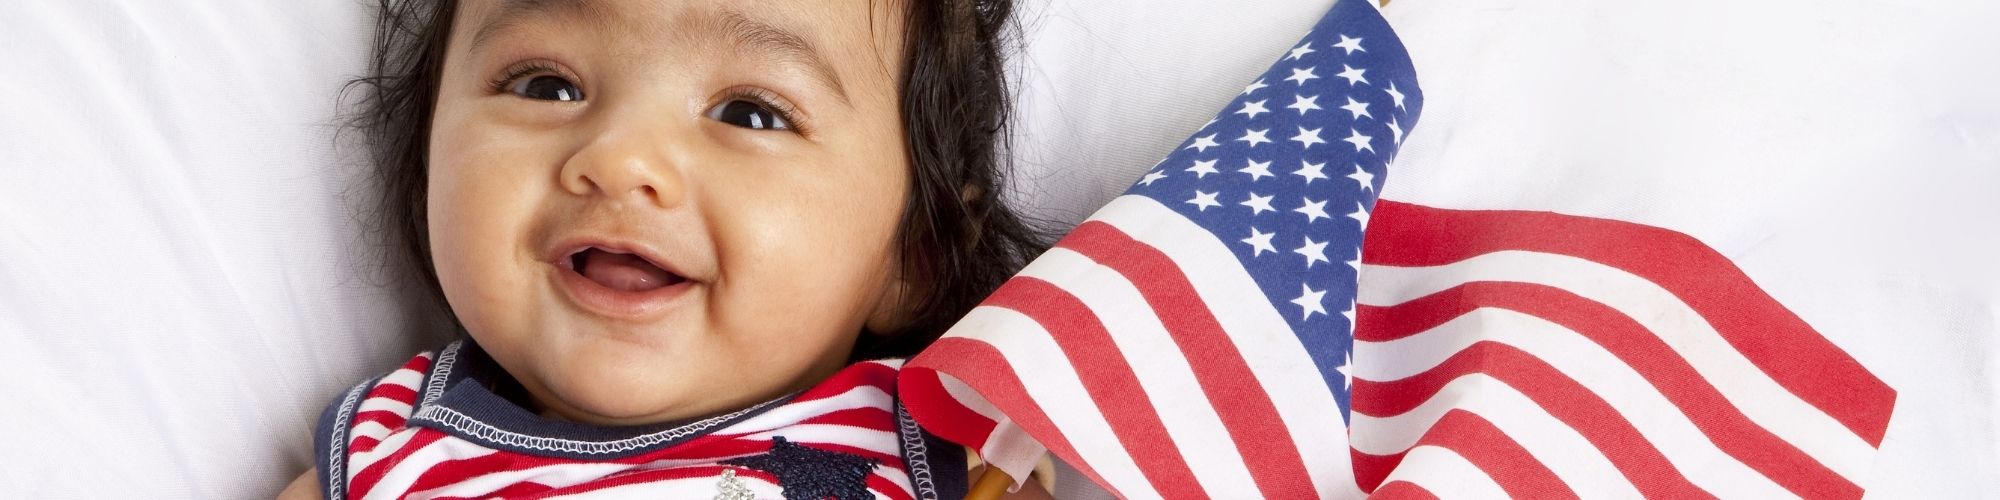 Hope for Heroes, Baby with flag and patriotic clothing